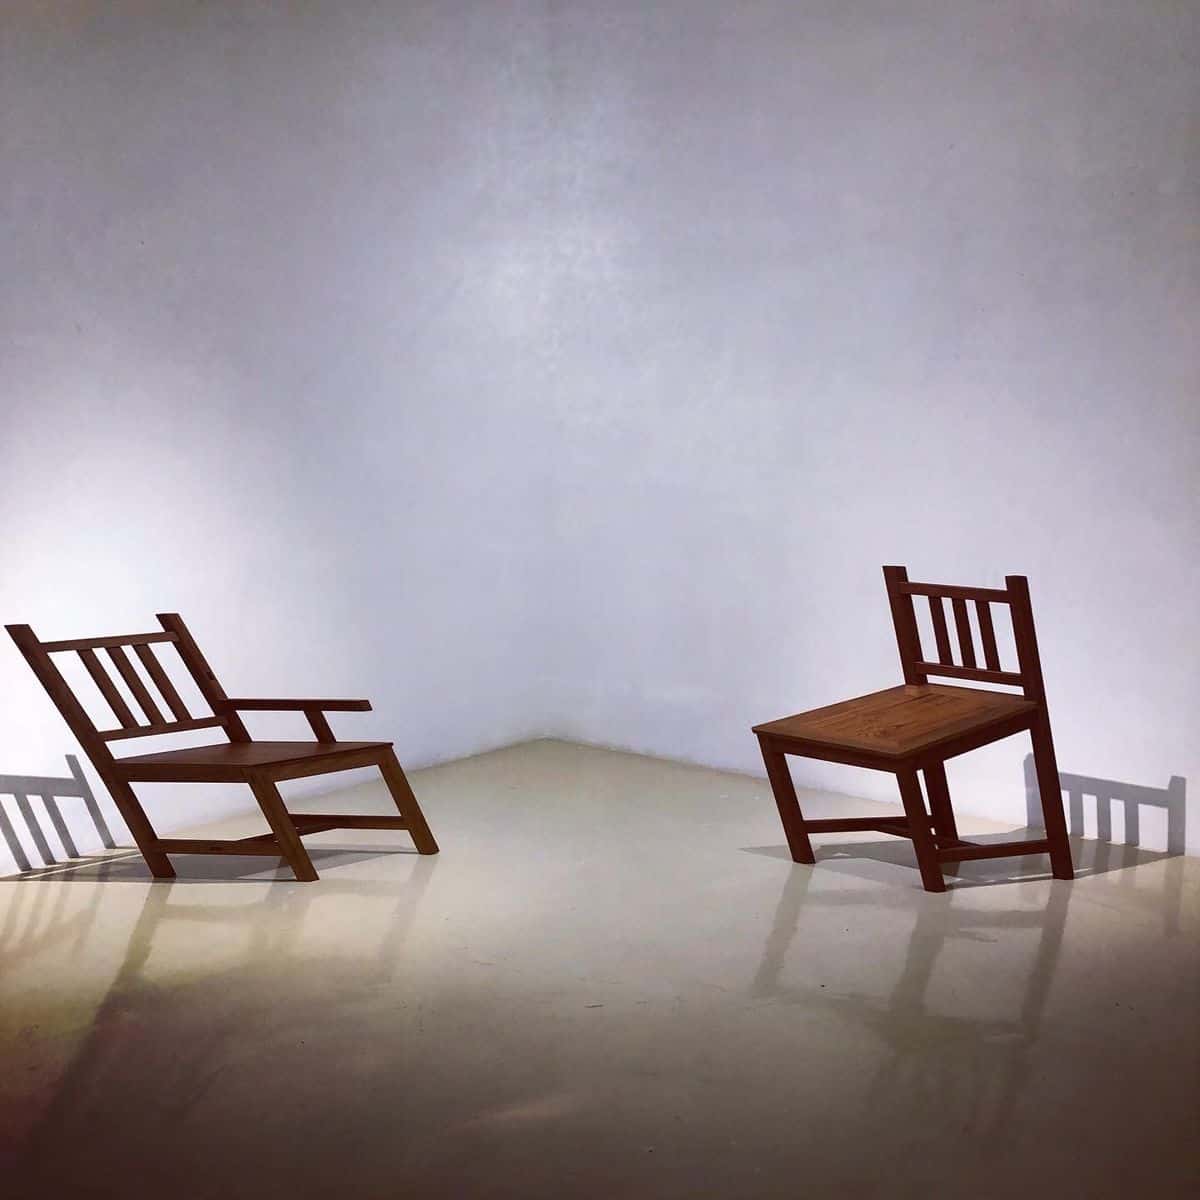 Tawatchai Puntusawasdi exhibition featuring skewed furniture (Chairs) positioned in a peculiar way